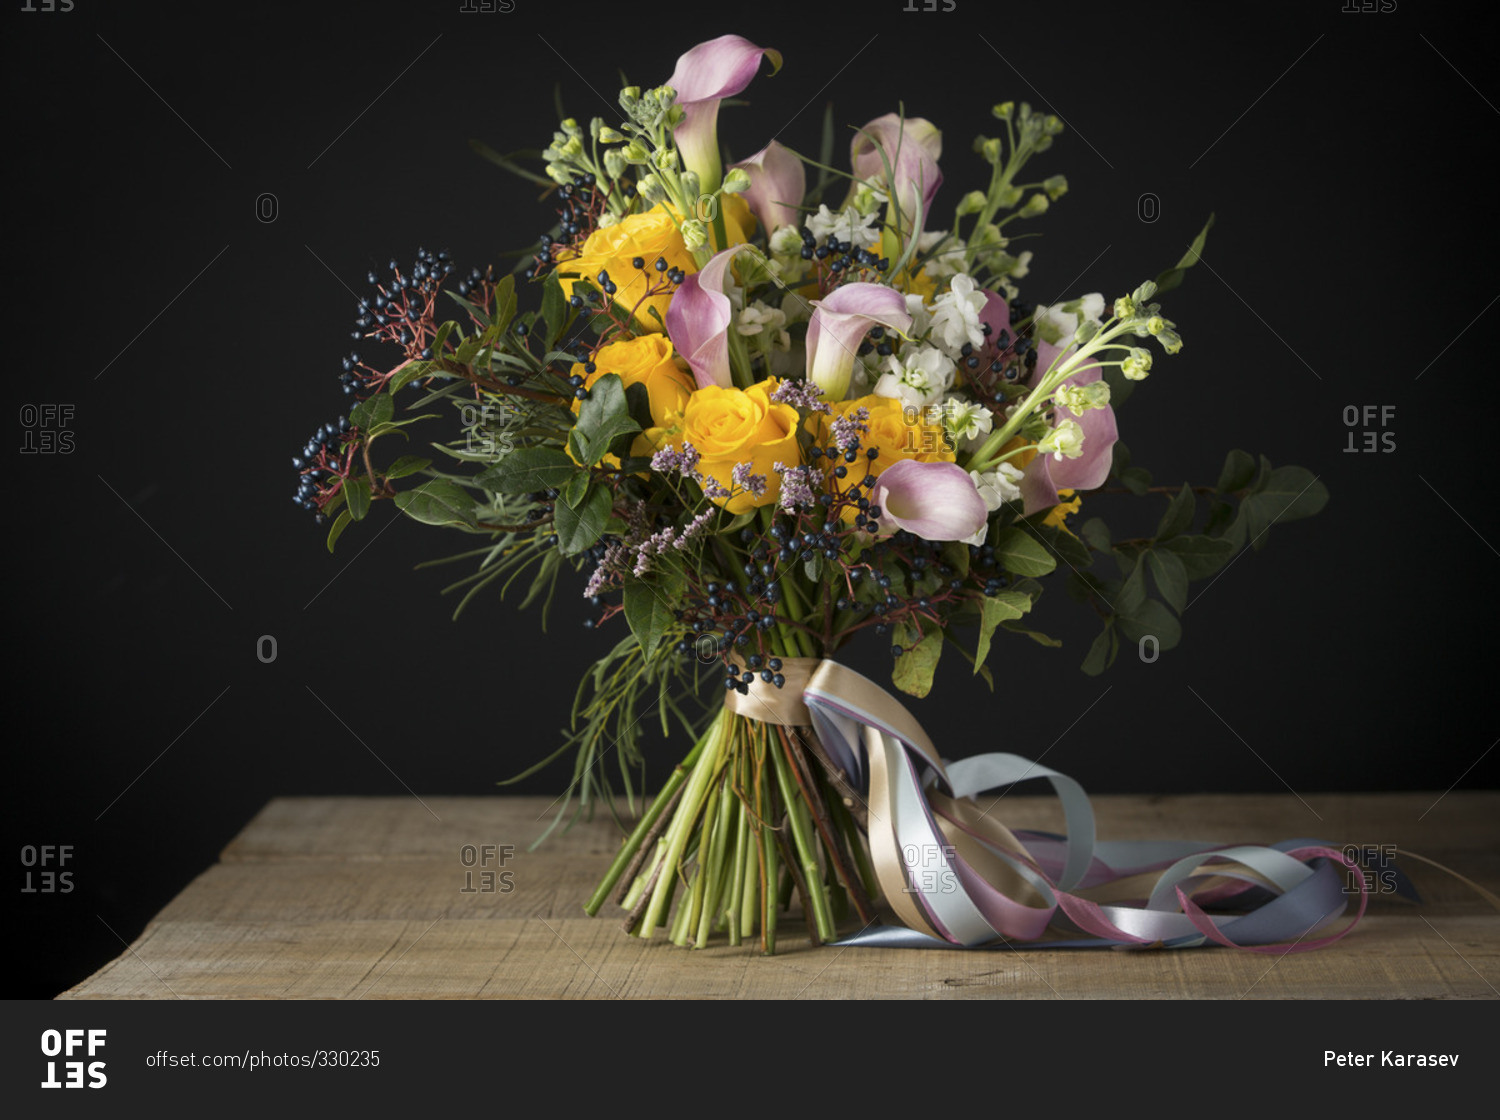 A bouquet of flowers on a table in front of a black background